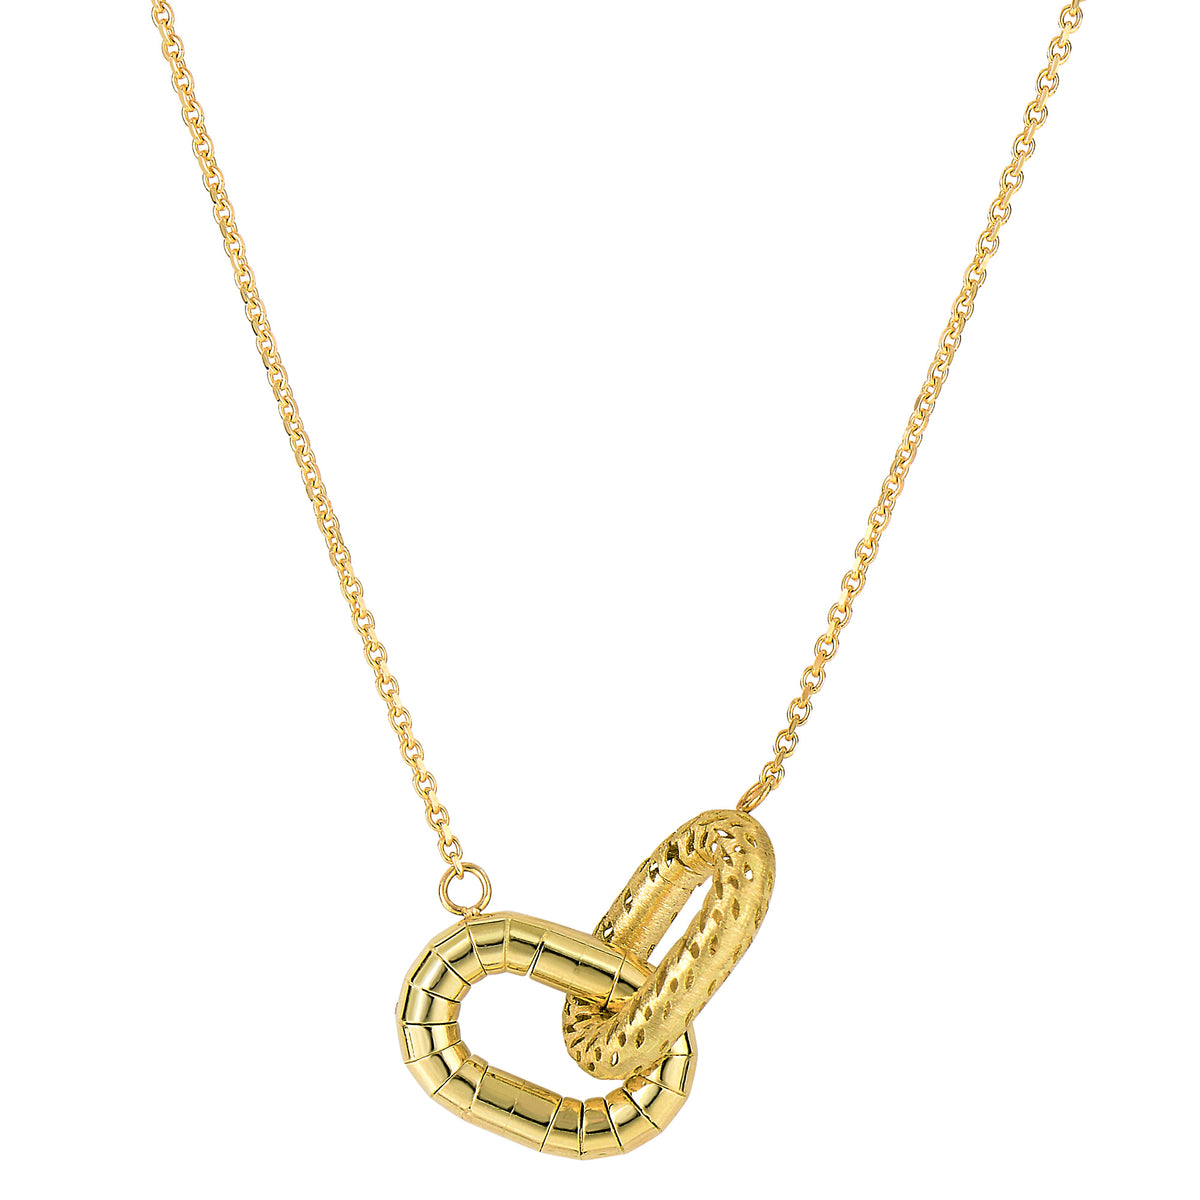 14k Yellow Gold Interconnected Oval Charms Necklace, 18" fine designer jewelry for men and women